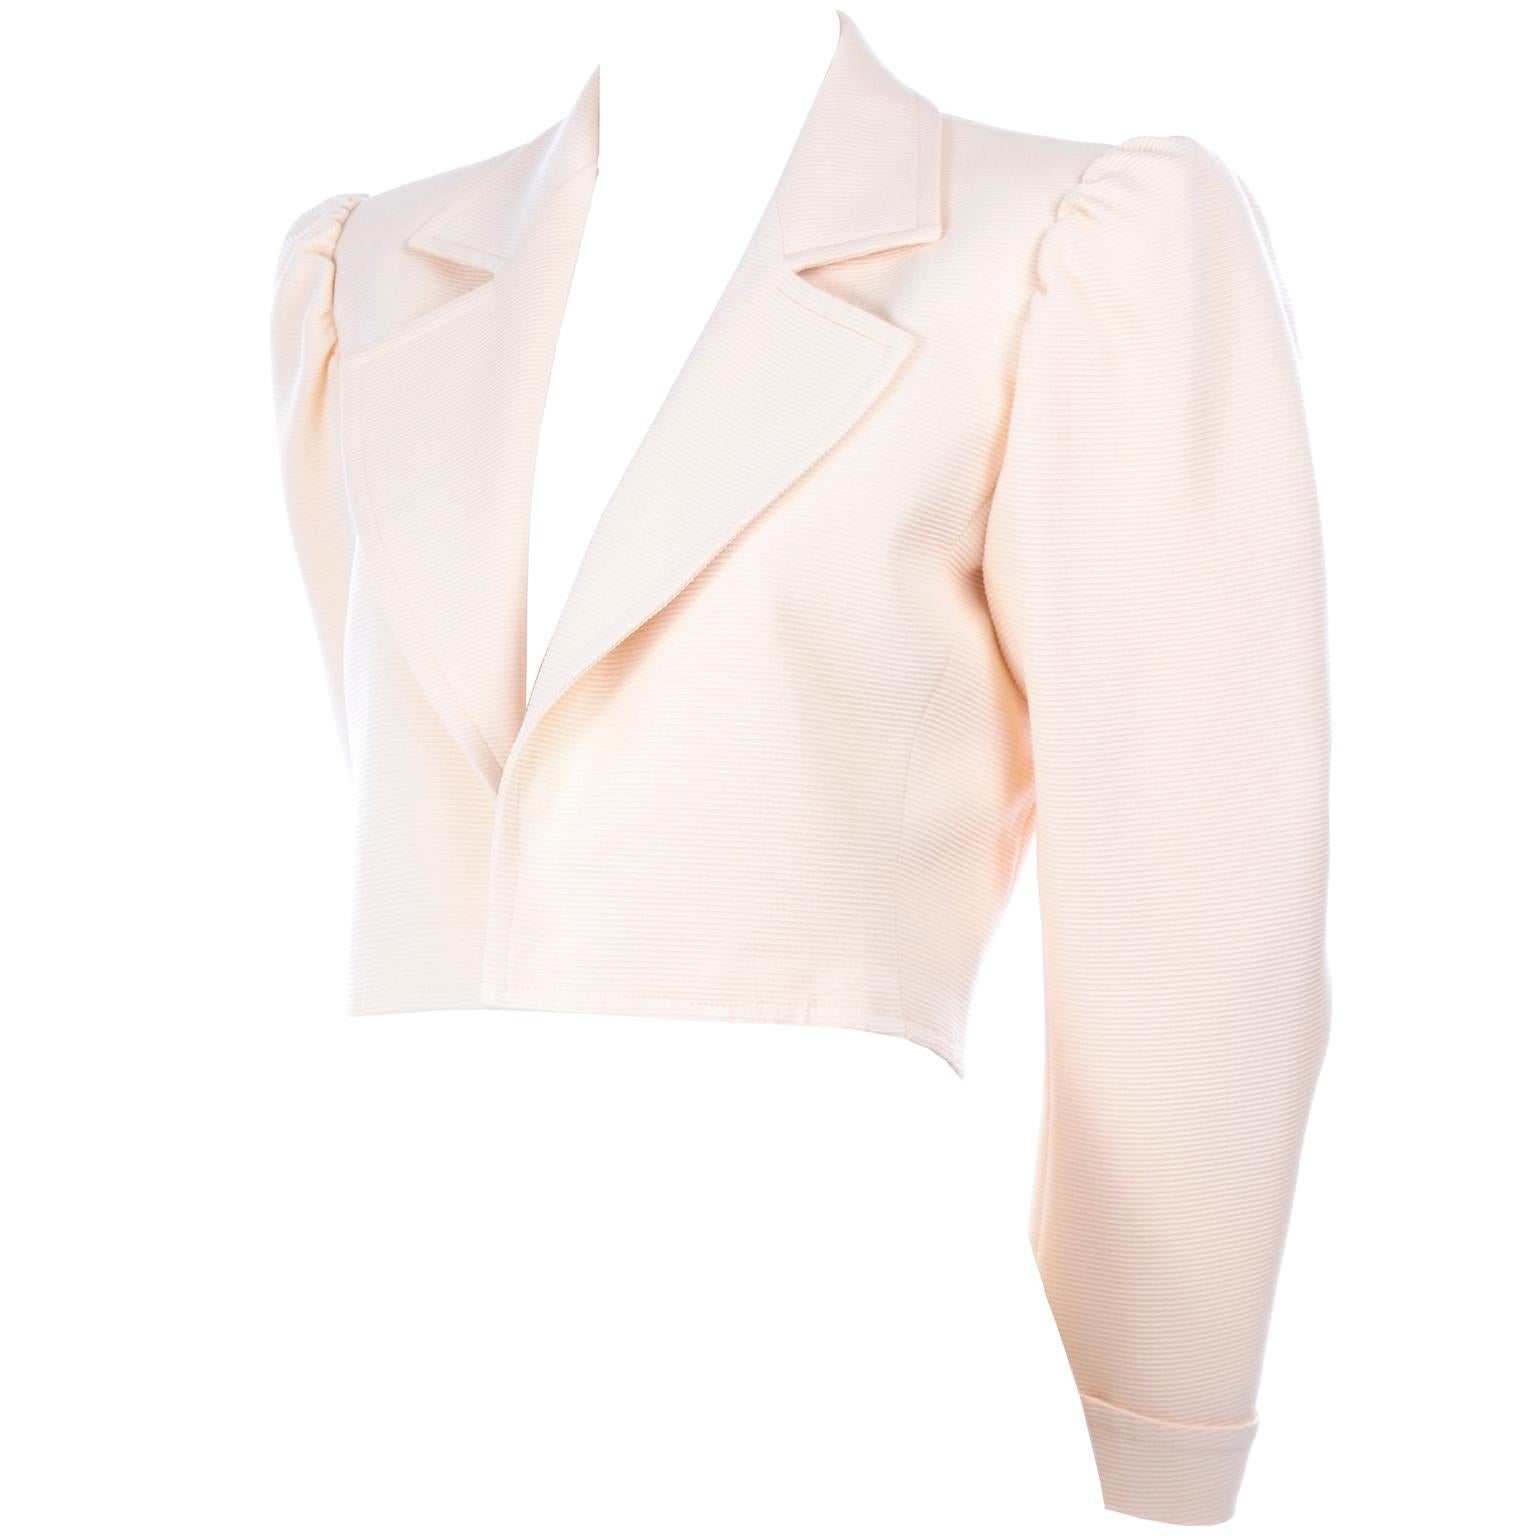 This is a versatile Yves Saint Laurent vintage cropped jacket with and open front. It made in a ribbed cream fabric with a cream silk lining. This is a great YSL blazer that can be worn today effortlessly with its gathered shoulders and cuffed